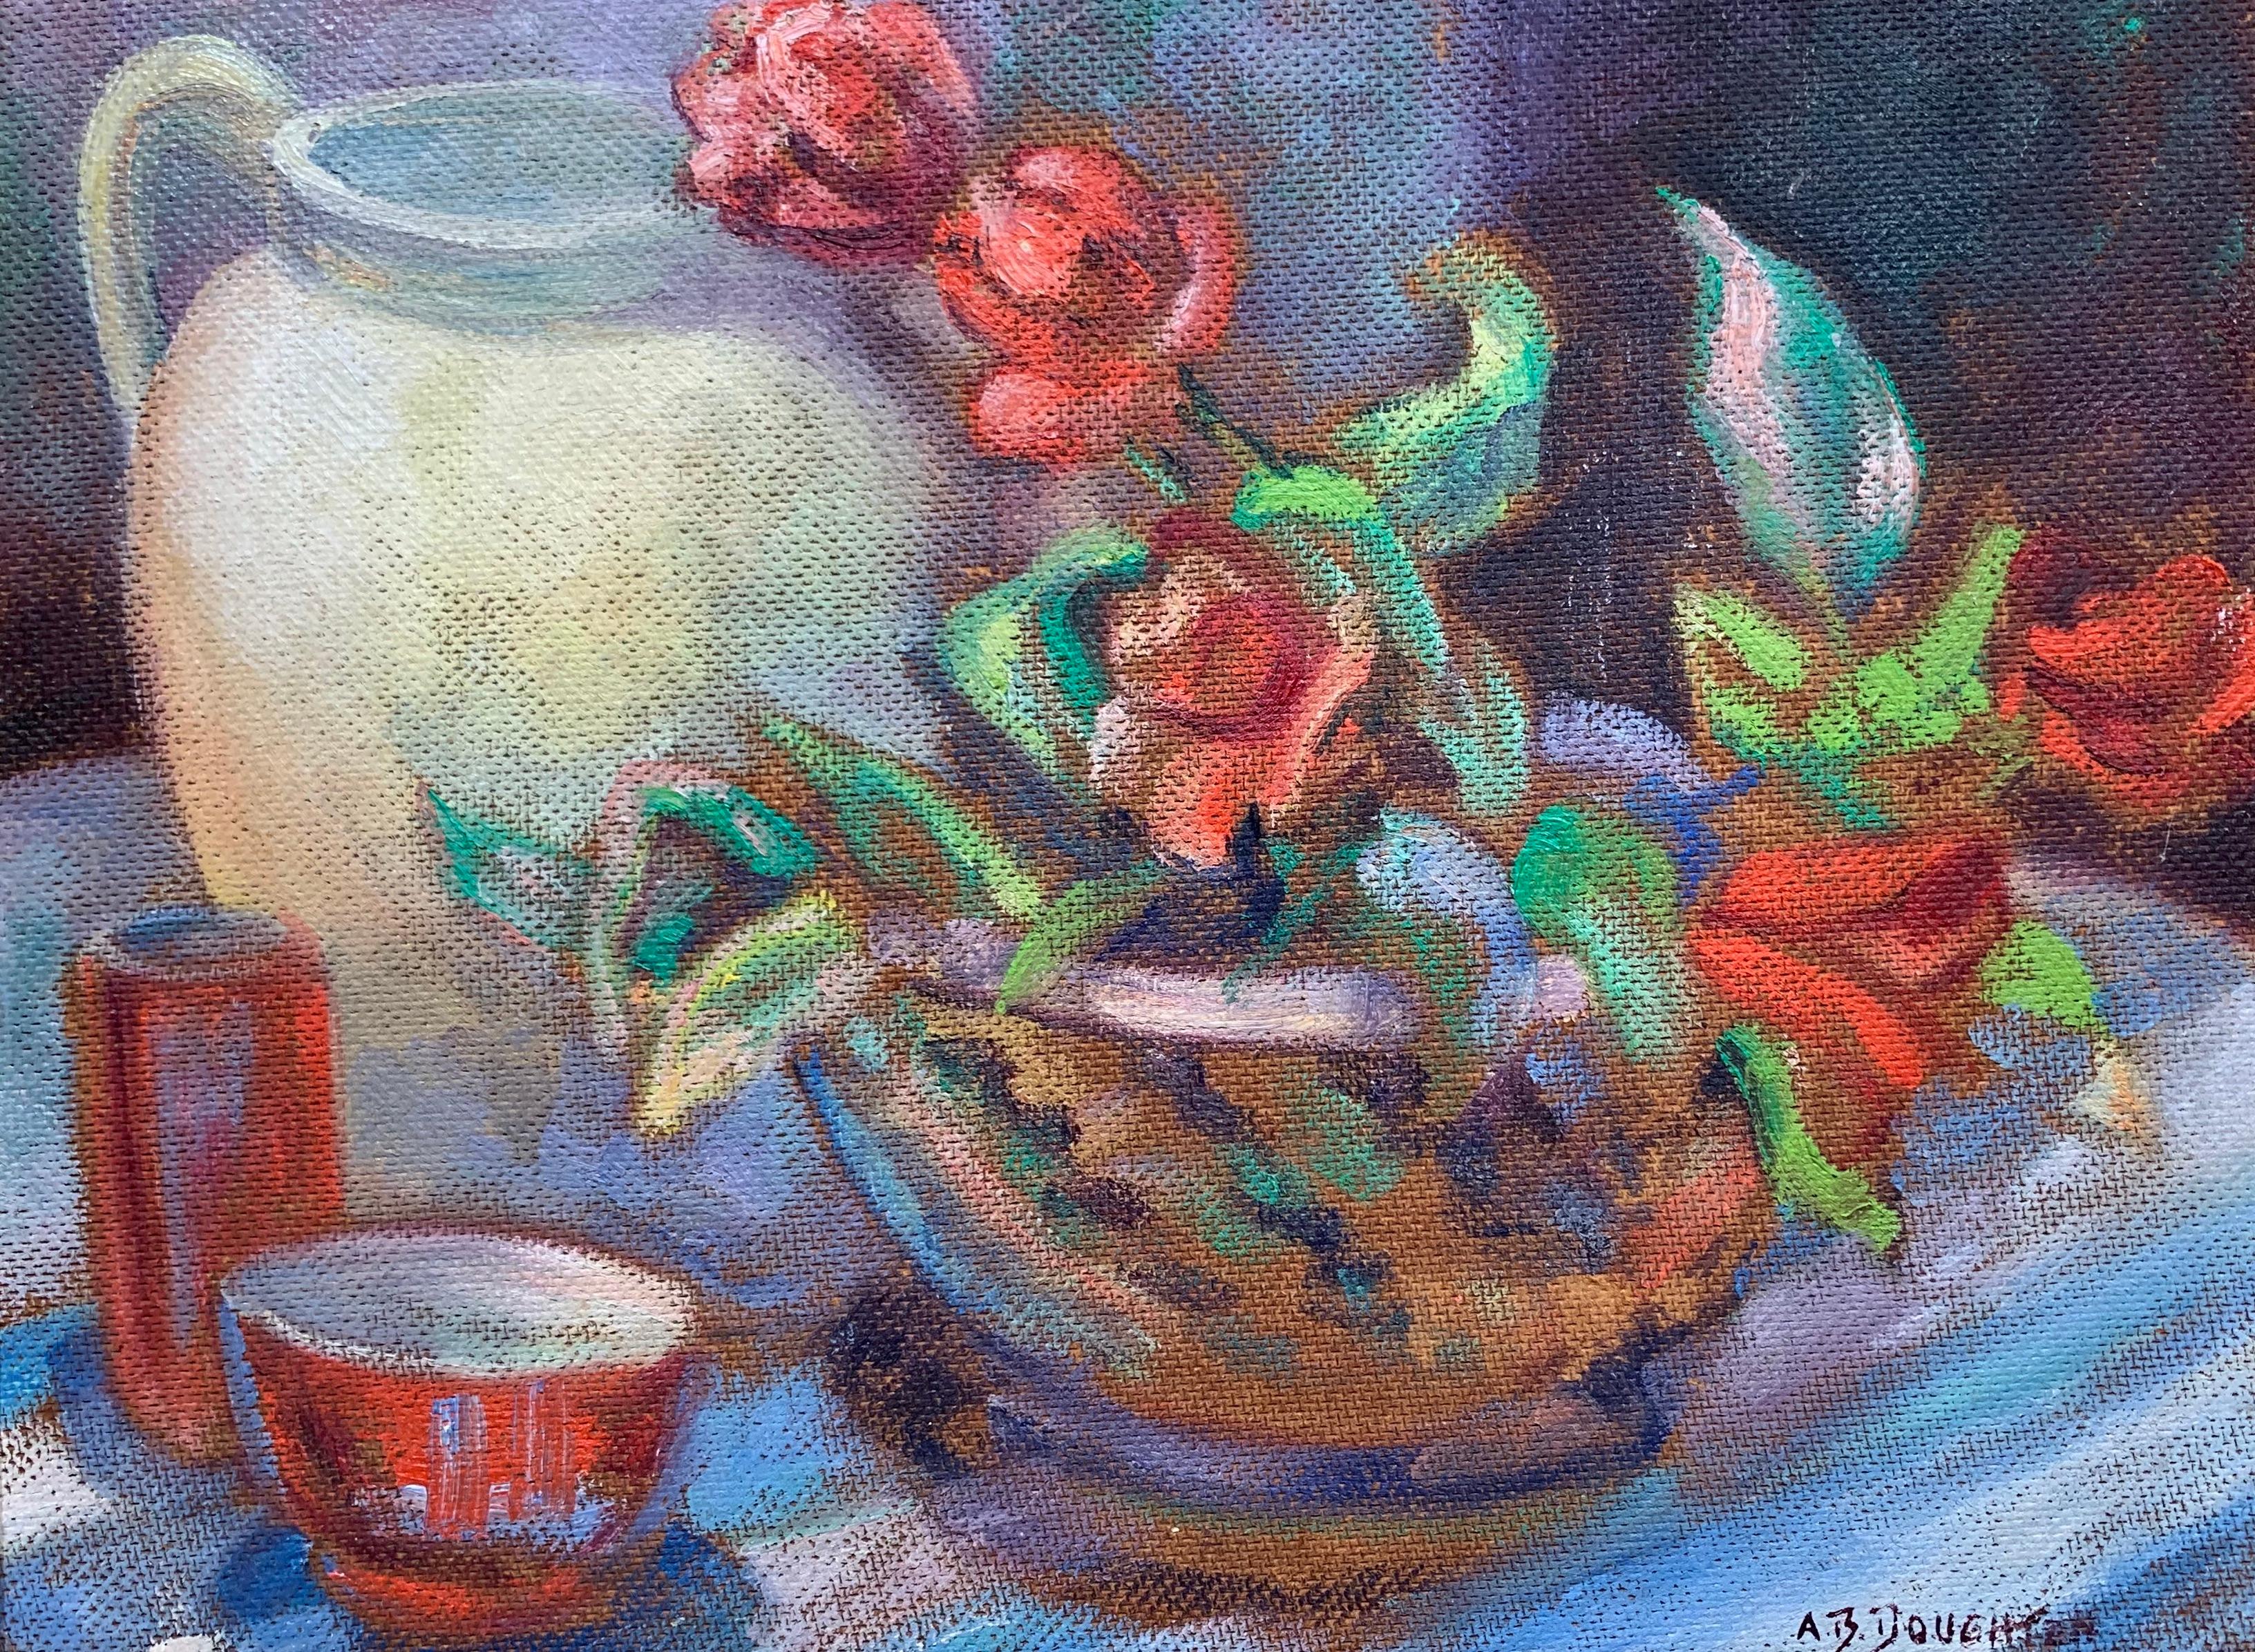 Still Life with Roses and Pitcher (PA Impressionist woman artist) - Painting by Alice B. Doughten